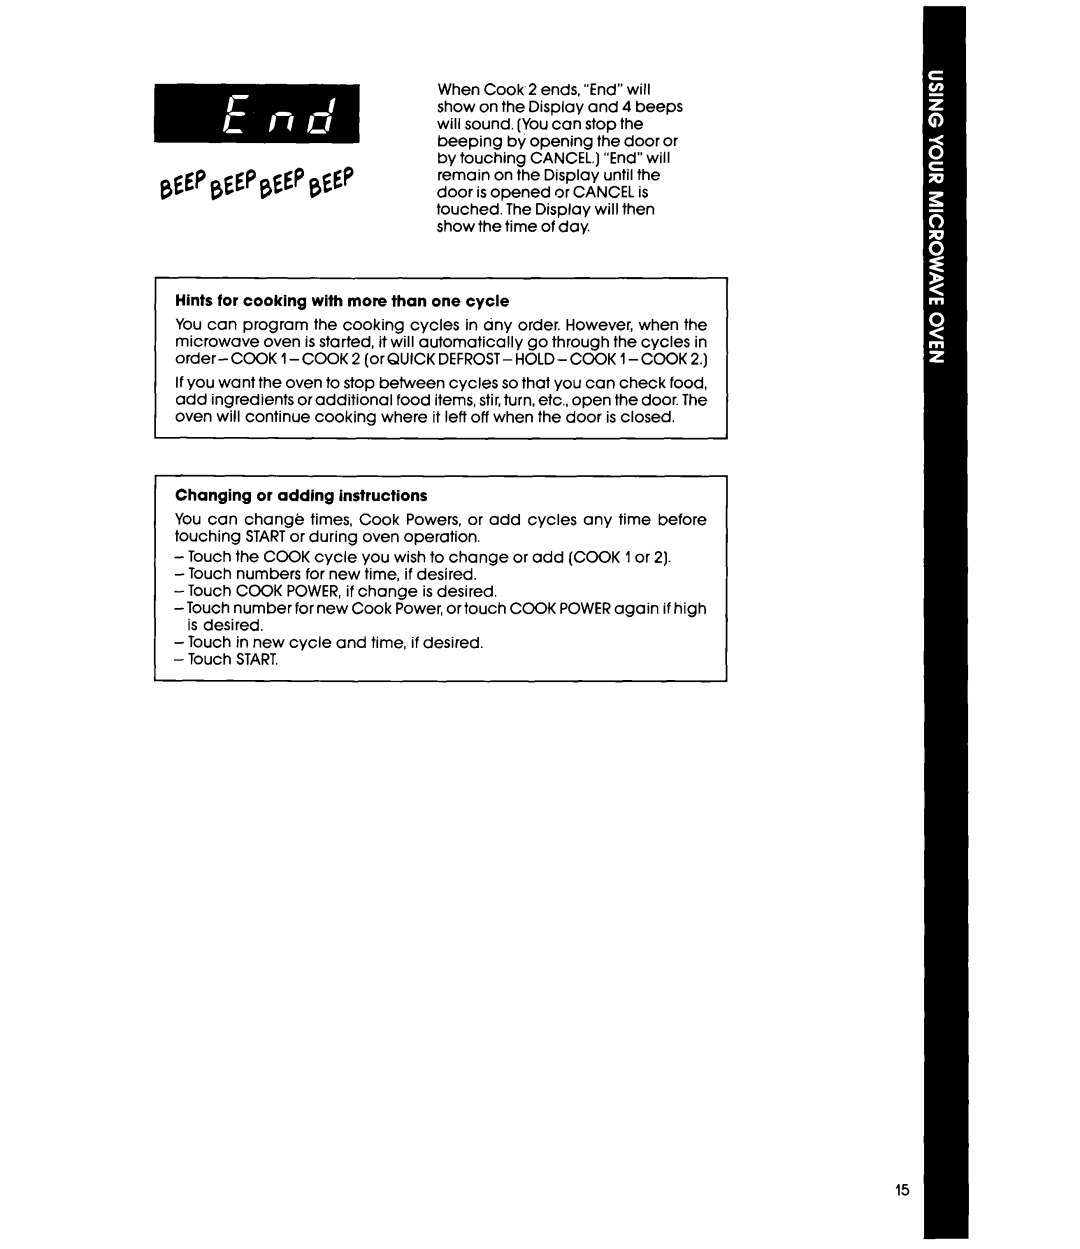 Whirlpool MW8570XR manual Hints for cooking with more than one cycle, Changing or adding instructions 